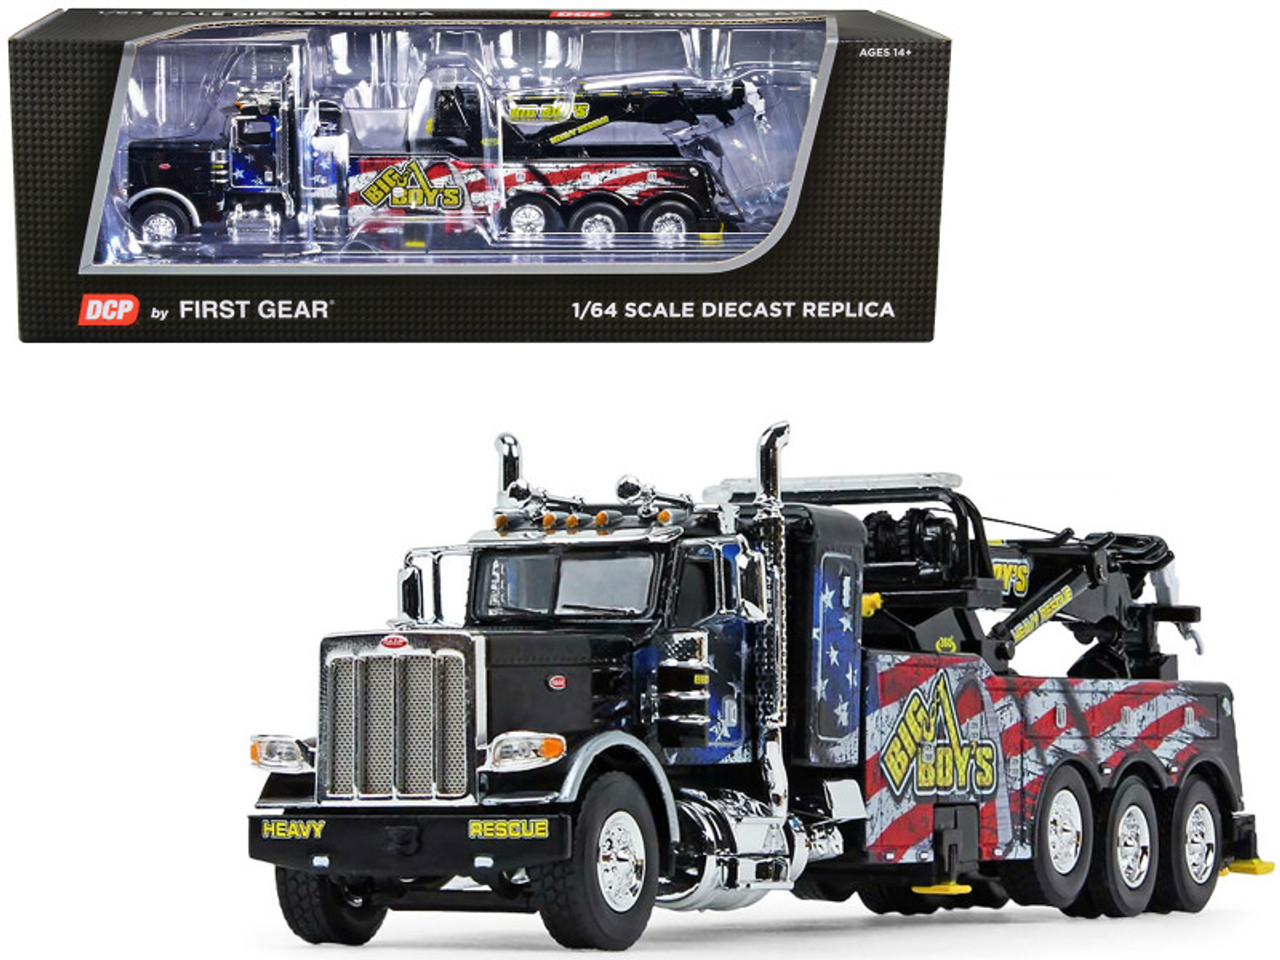 Peterbilt 389 Sleeper Cab with Century 1150 Rotator Wrecker Tow Truck Black "Big Boy's Towing & Recovery" 1/64 Diecast Model by DCP/First Gear